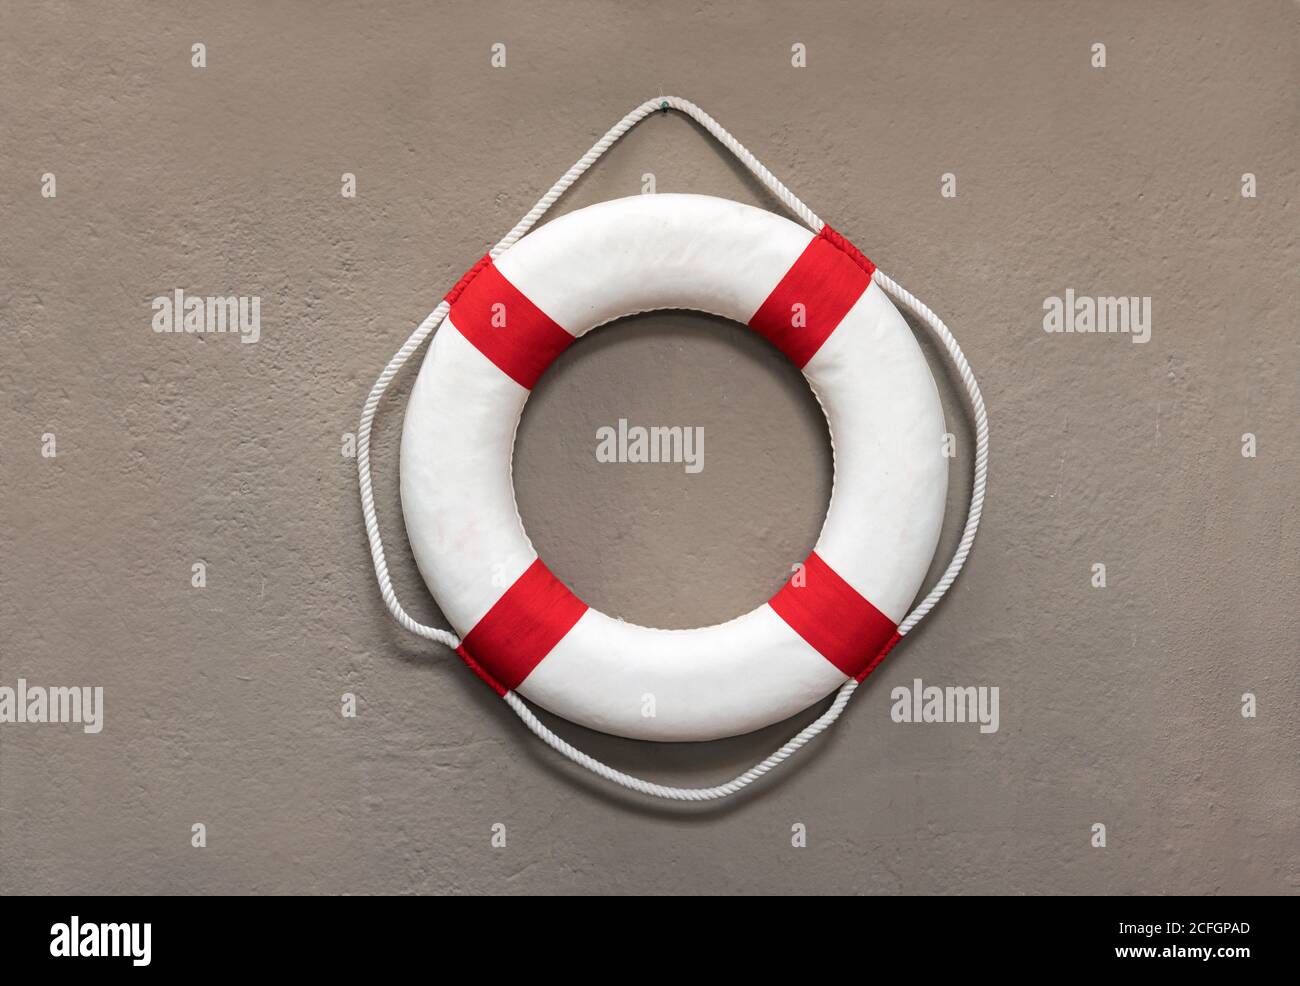 Circular red and white life preserver or lifebuoy hanging on a wall for use as a buoyancy aid or flotation device in case of drowning or sinking of a Stock Photo